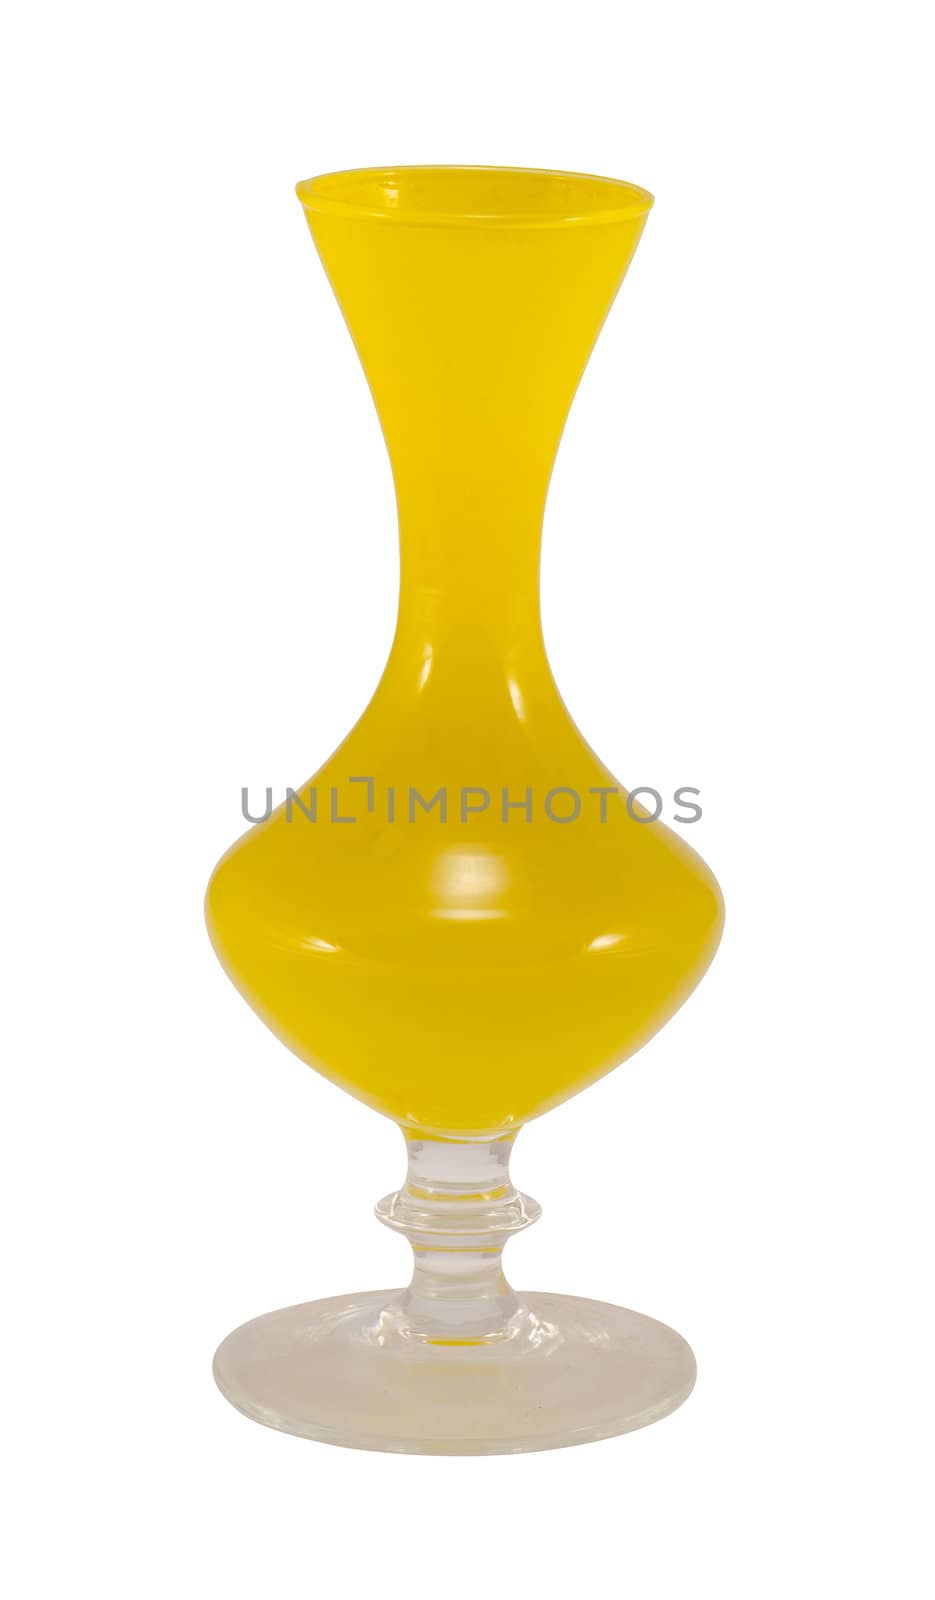 Retro glass yellow vase object isolated on white by sauletas